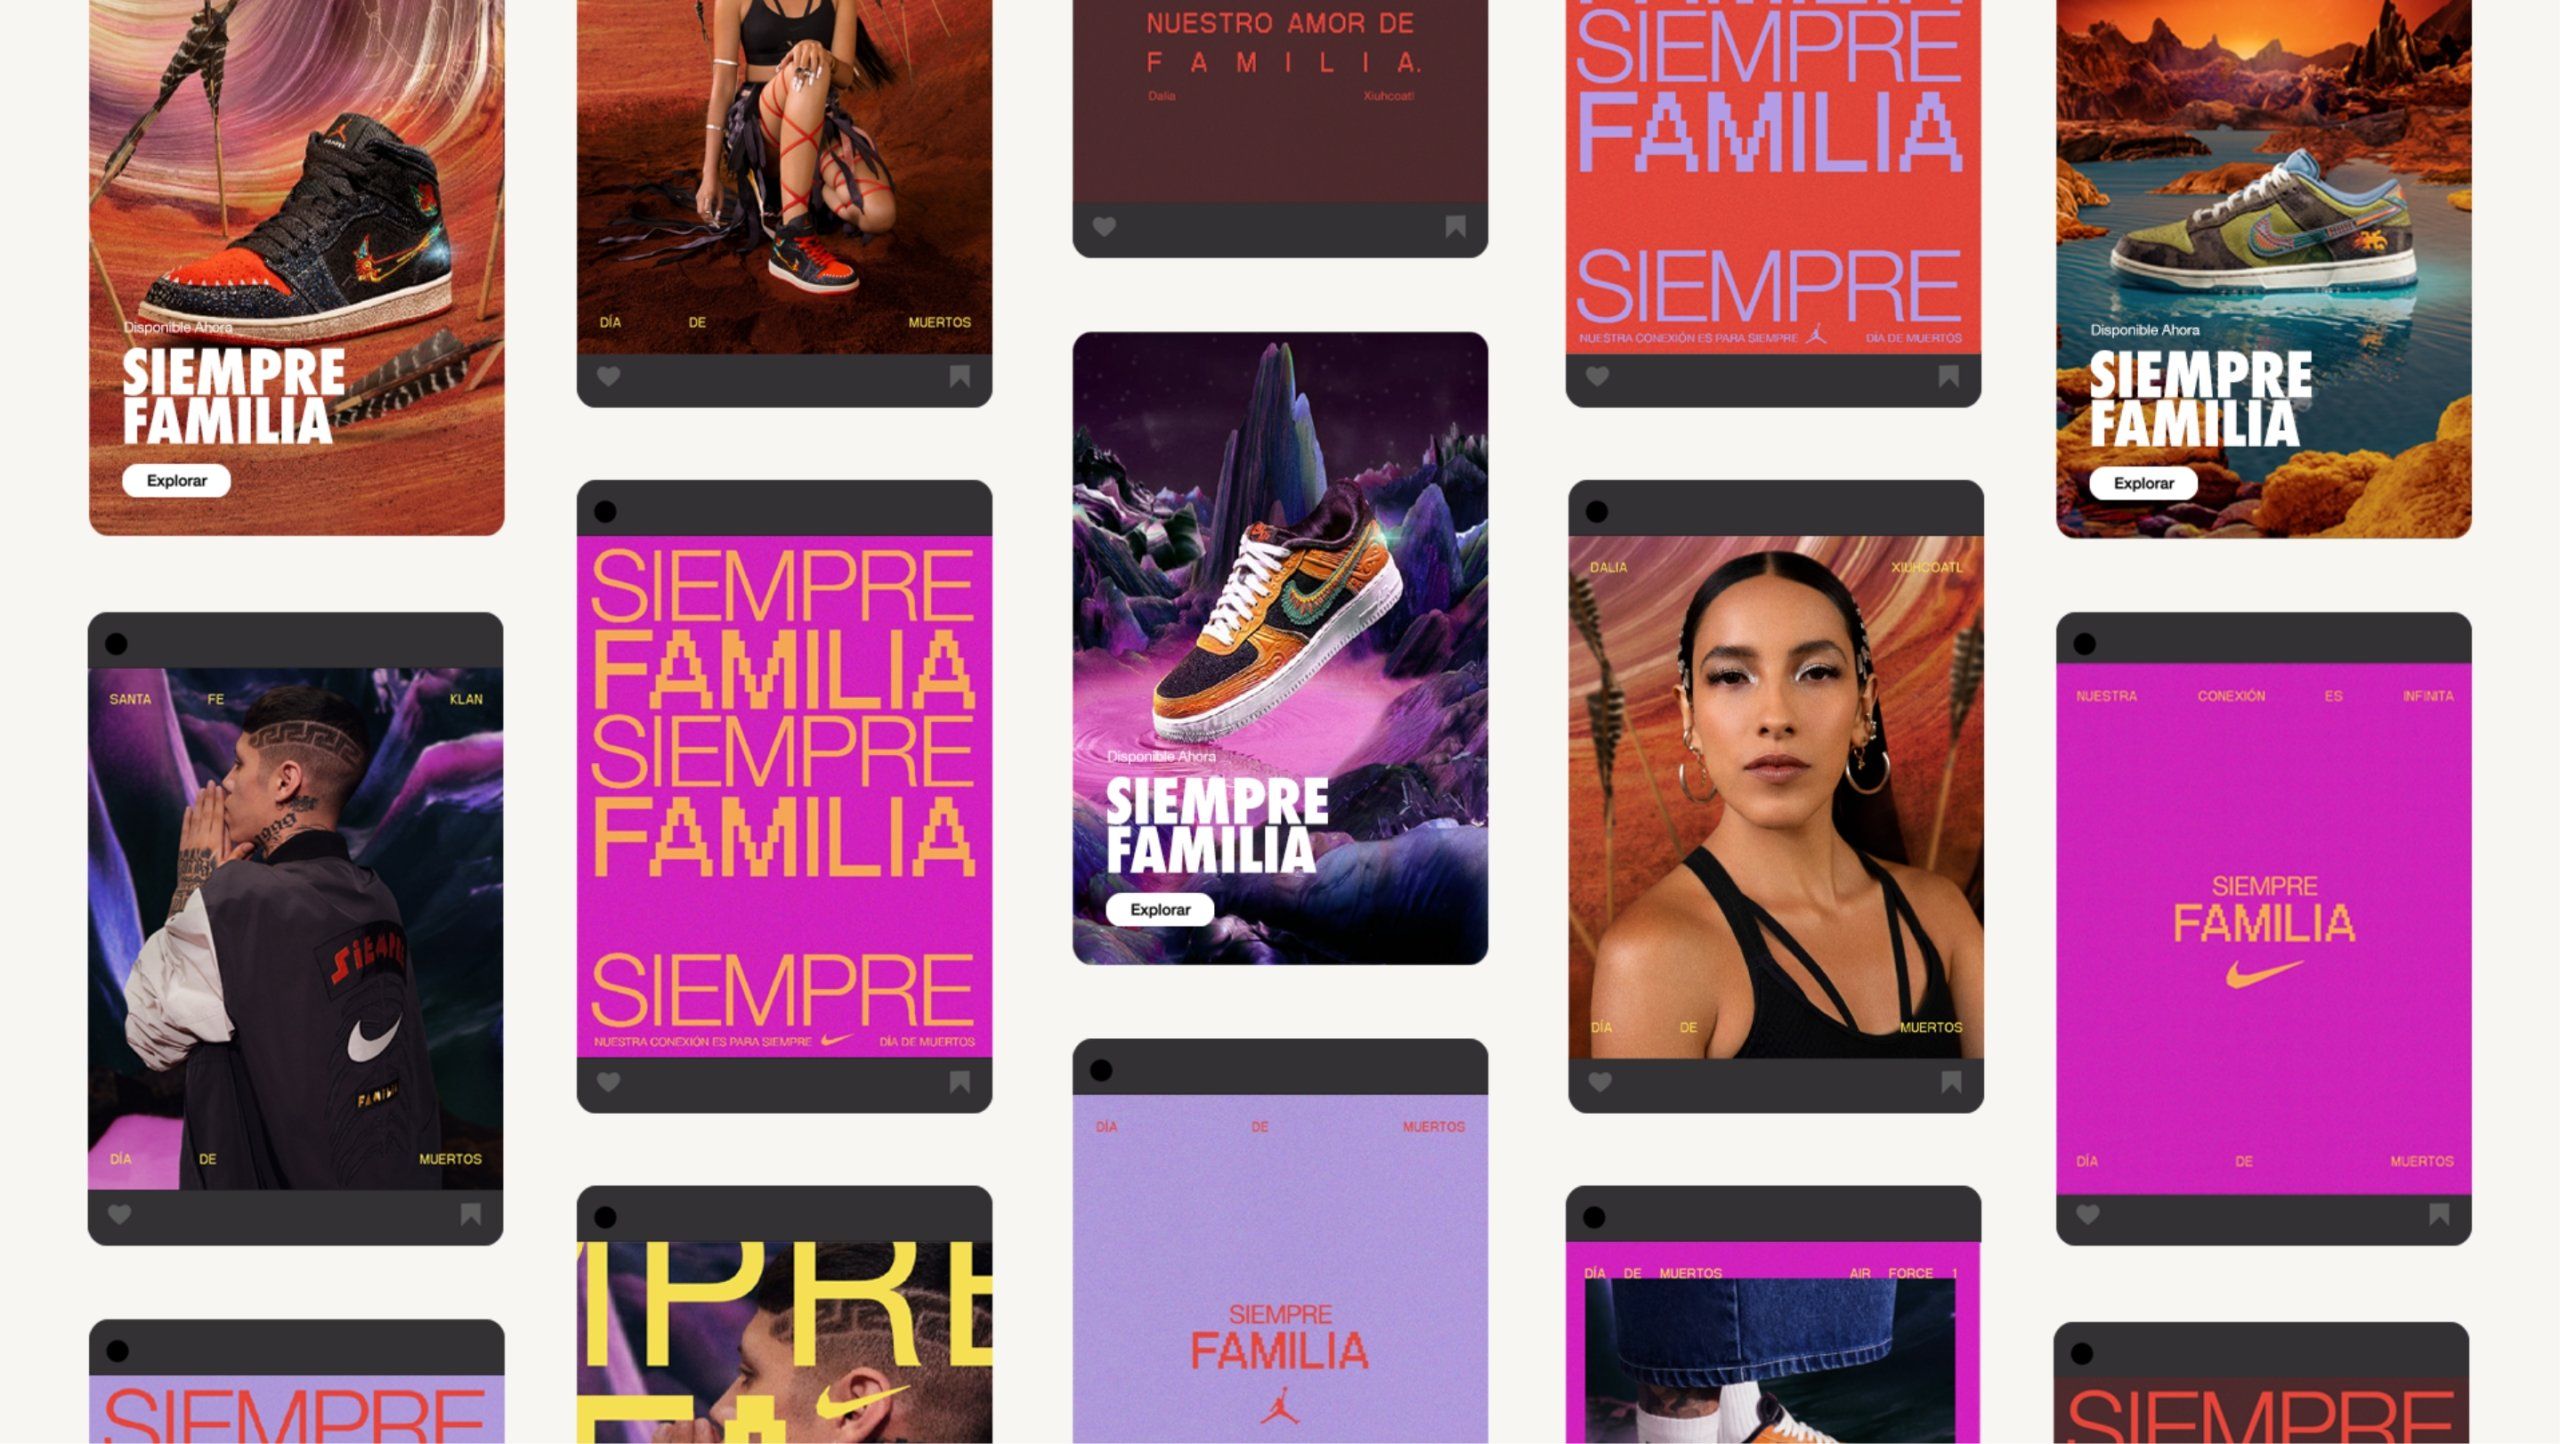 Compiliation of Siempre Familia screens on Nike App